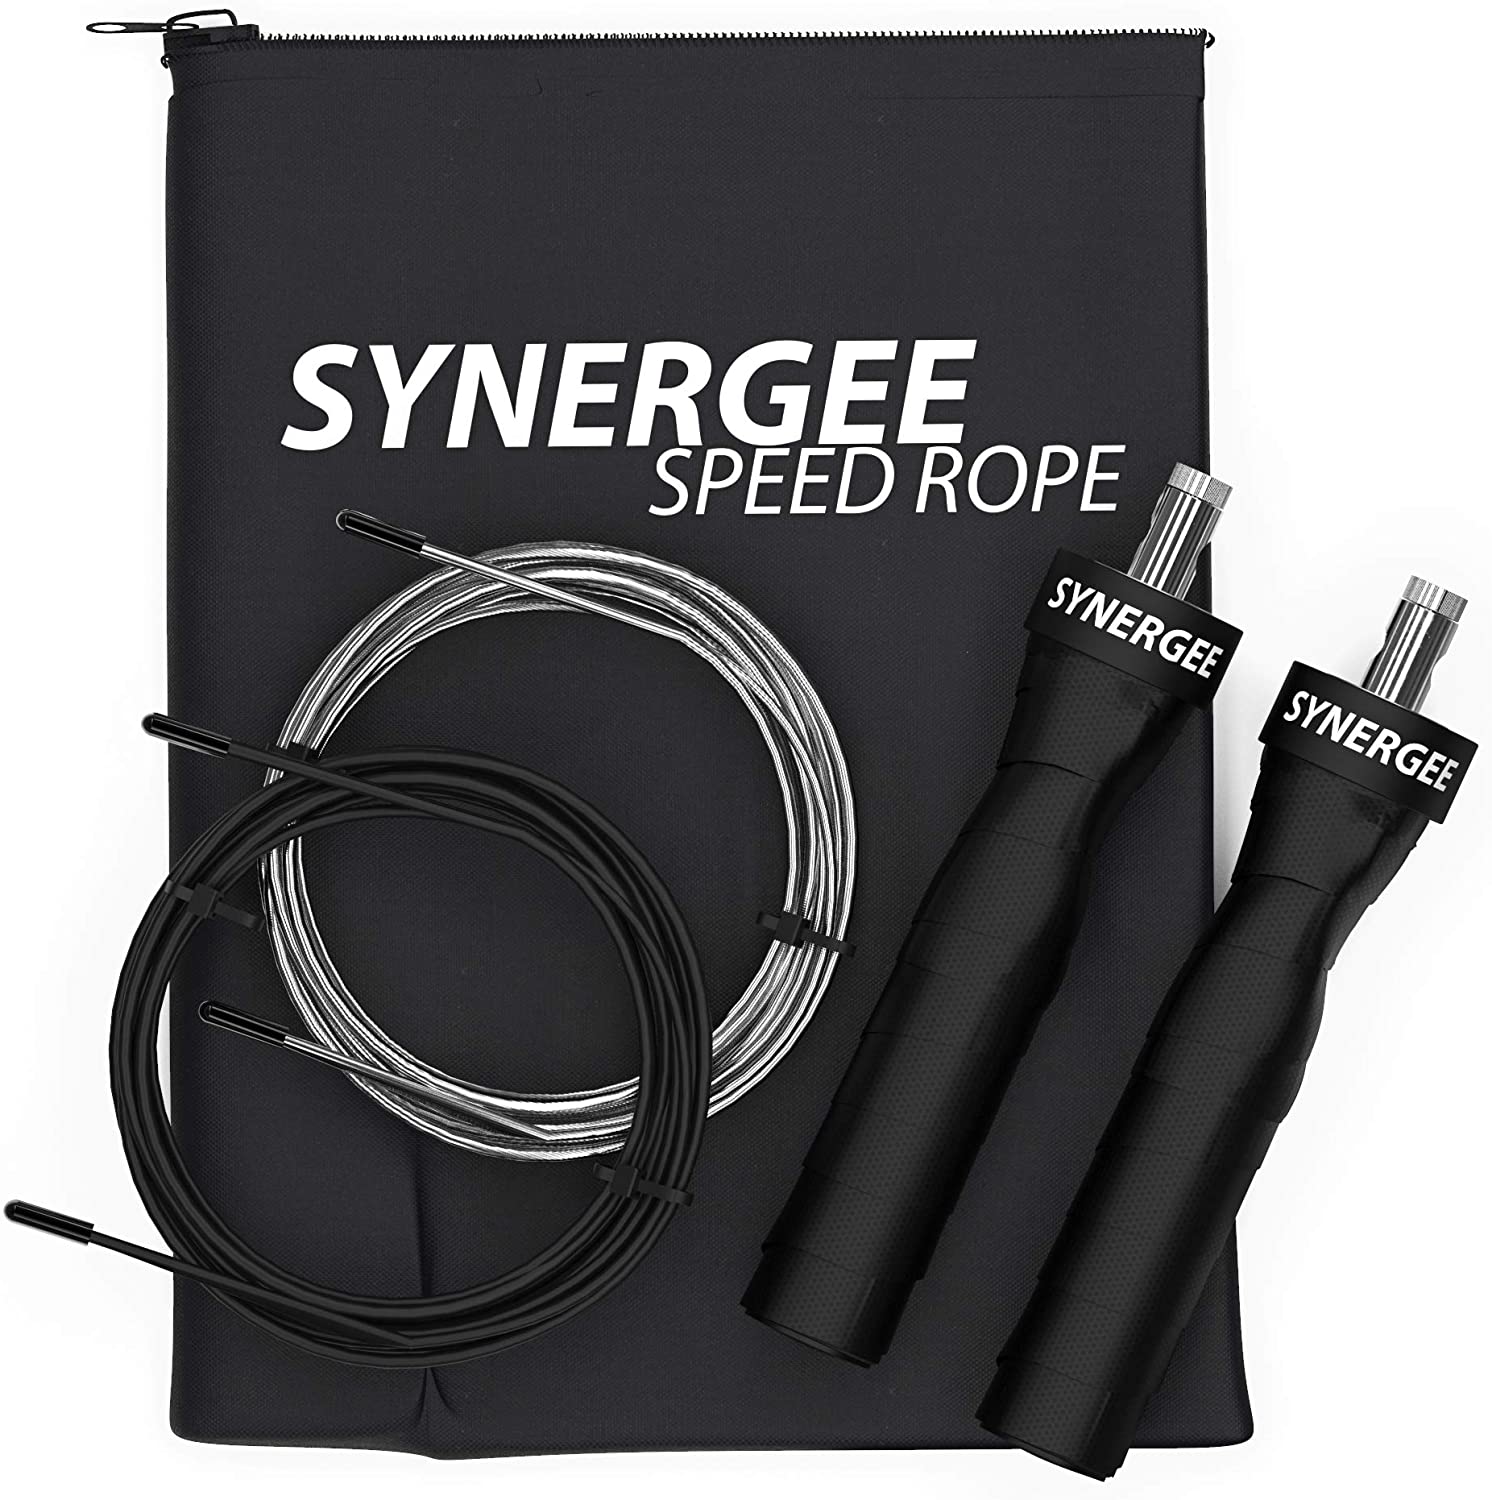 Synergee Speed Jump Ropes. Anti-Slip Handles with Steel Ball Bearings, 2 Adjustable 10 Ft Cables and Carrying Bag. Great for Crossfit, MMA, Boxing & Fitness. Available in Green. - e4cents